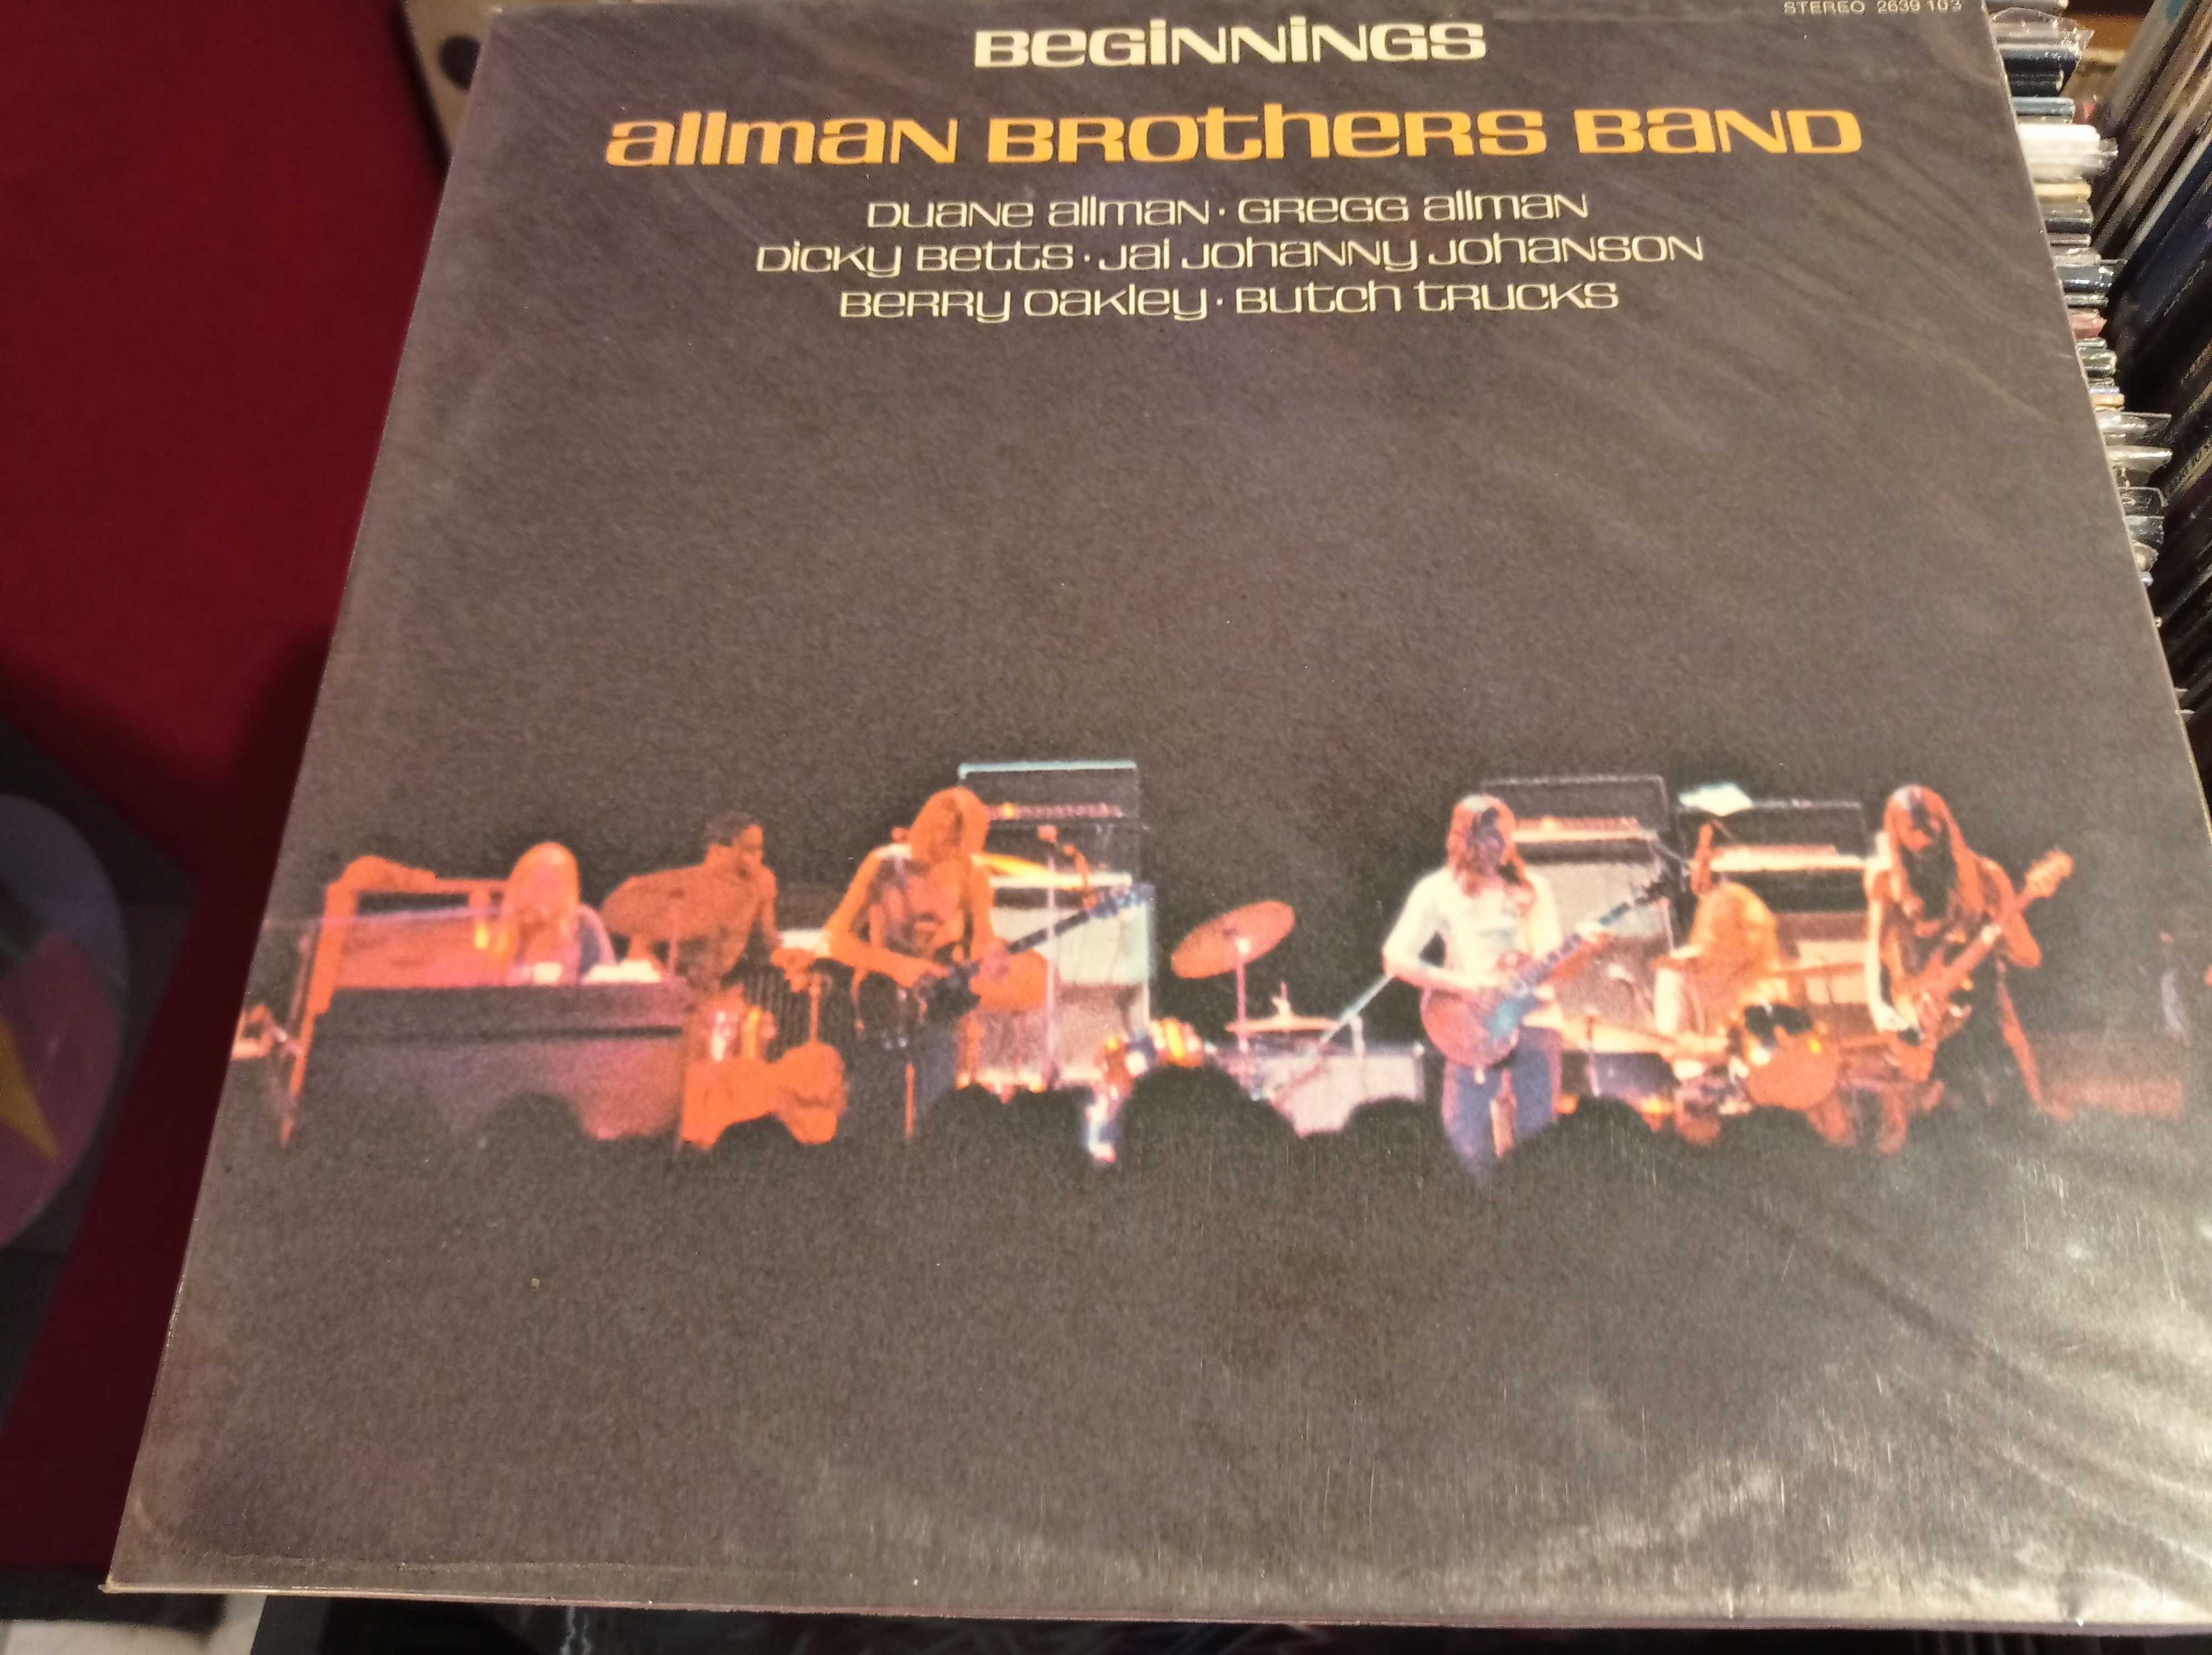 Allman Brothers Band - Beginngs